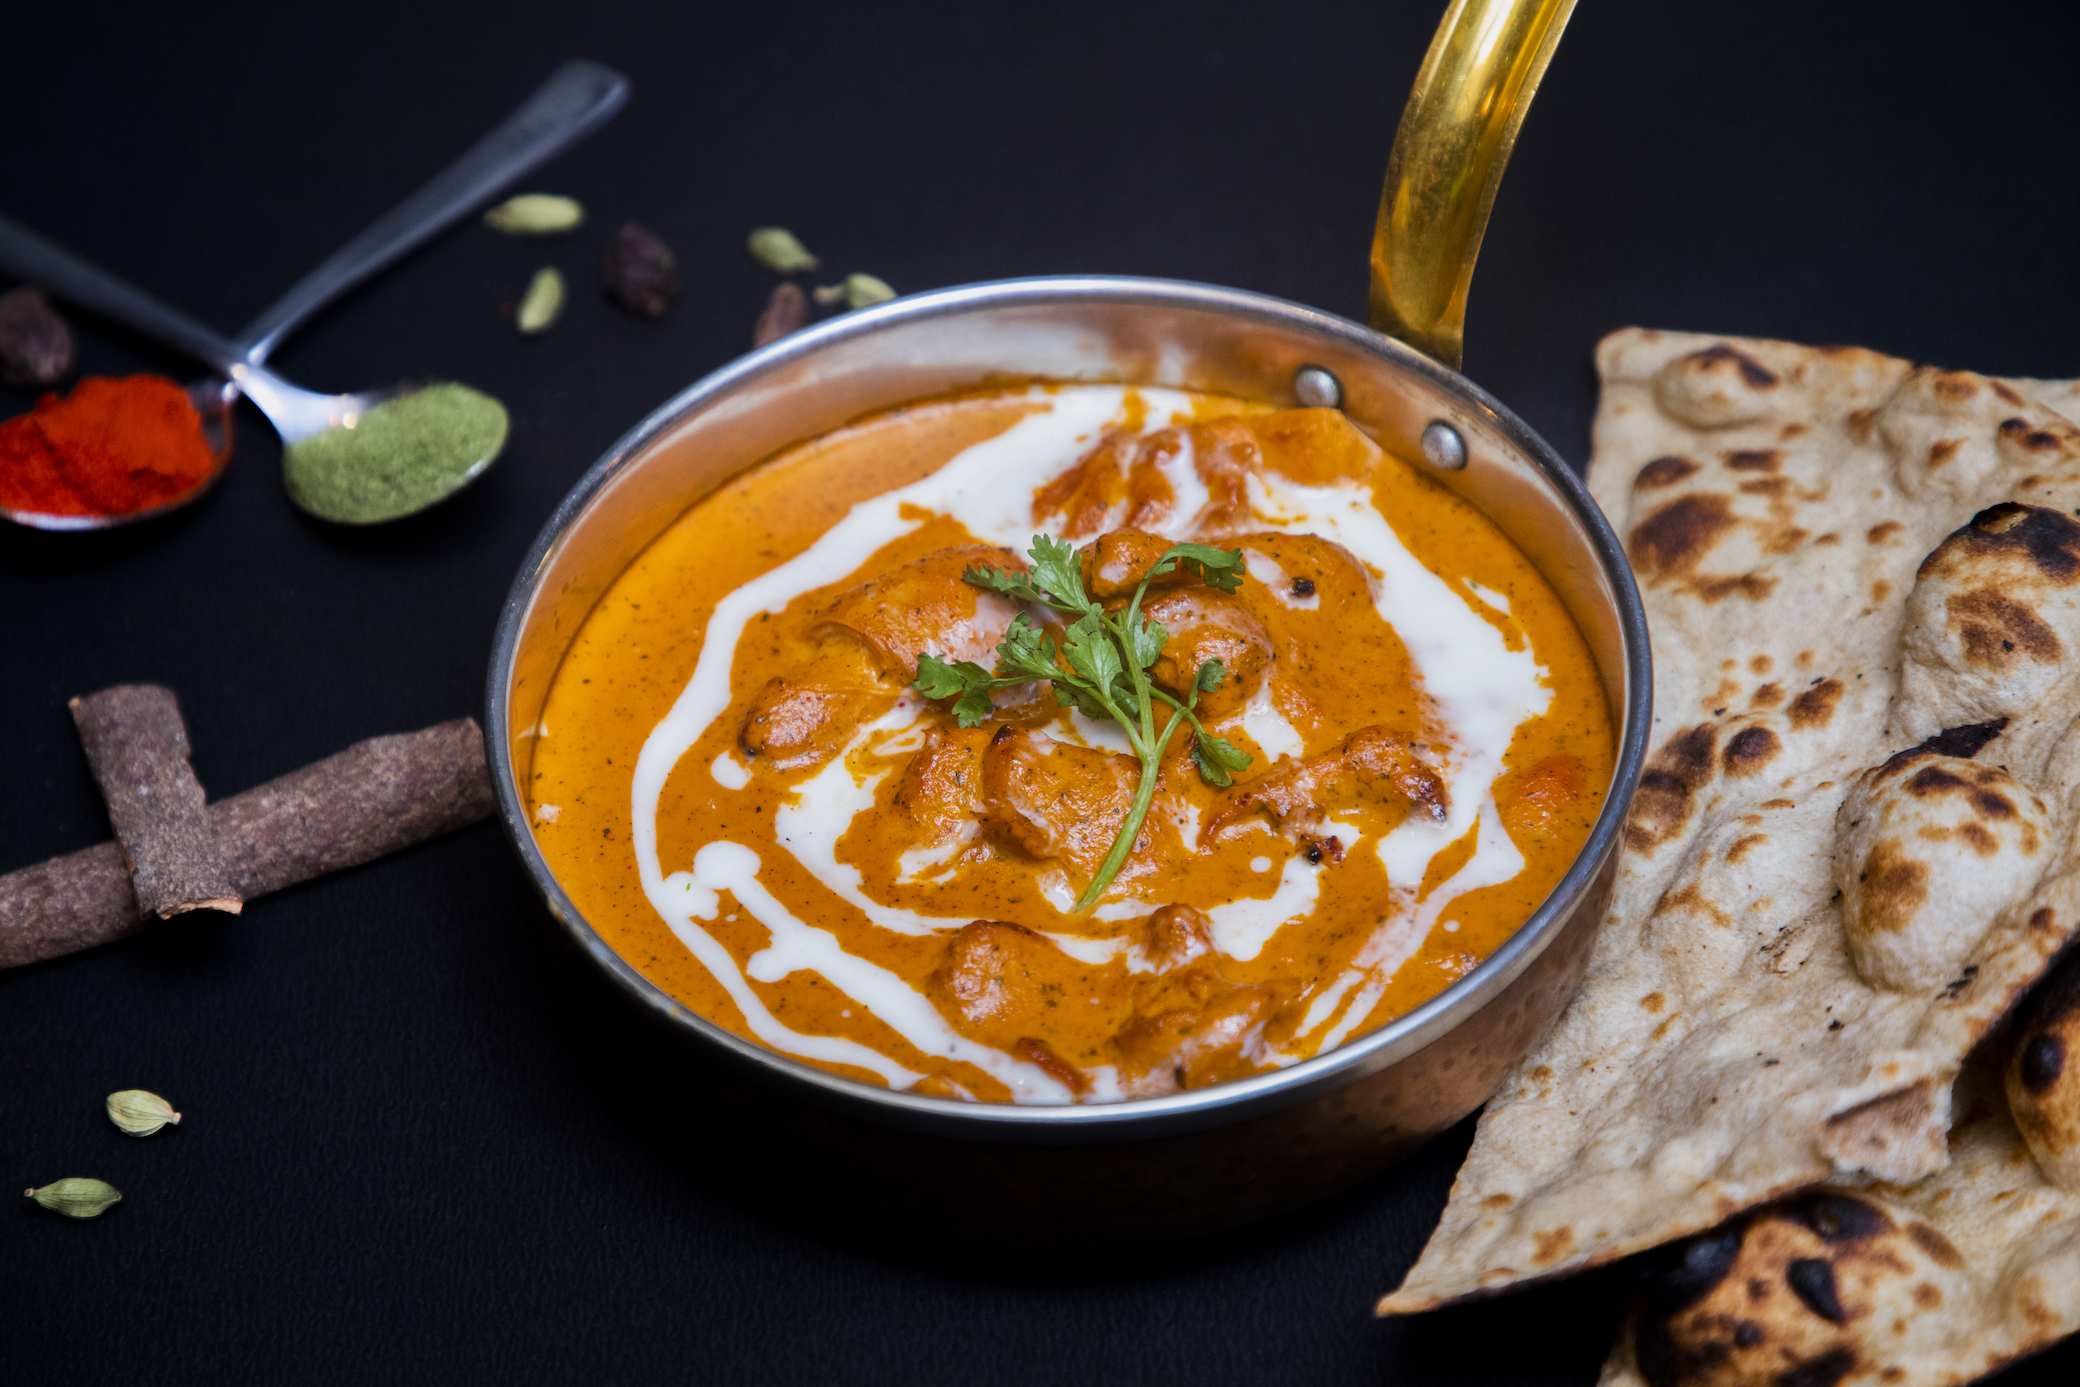 With Over 11 Variants, This Company Has Taken Their Butter Chicken Love To Next Level!